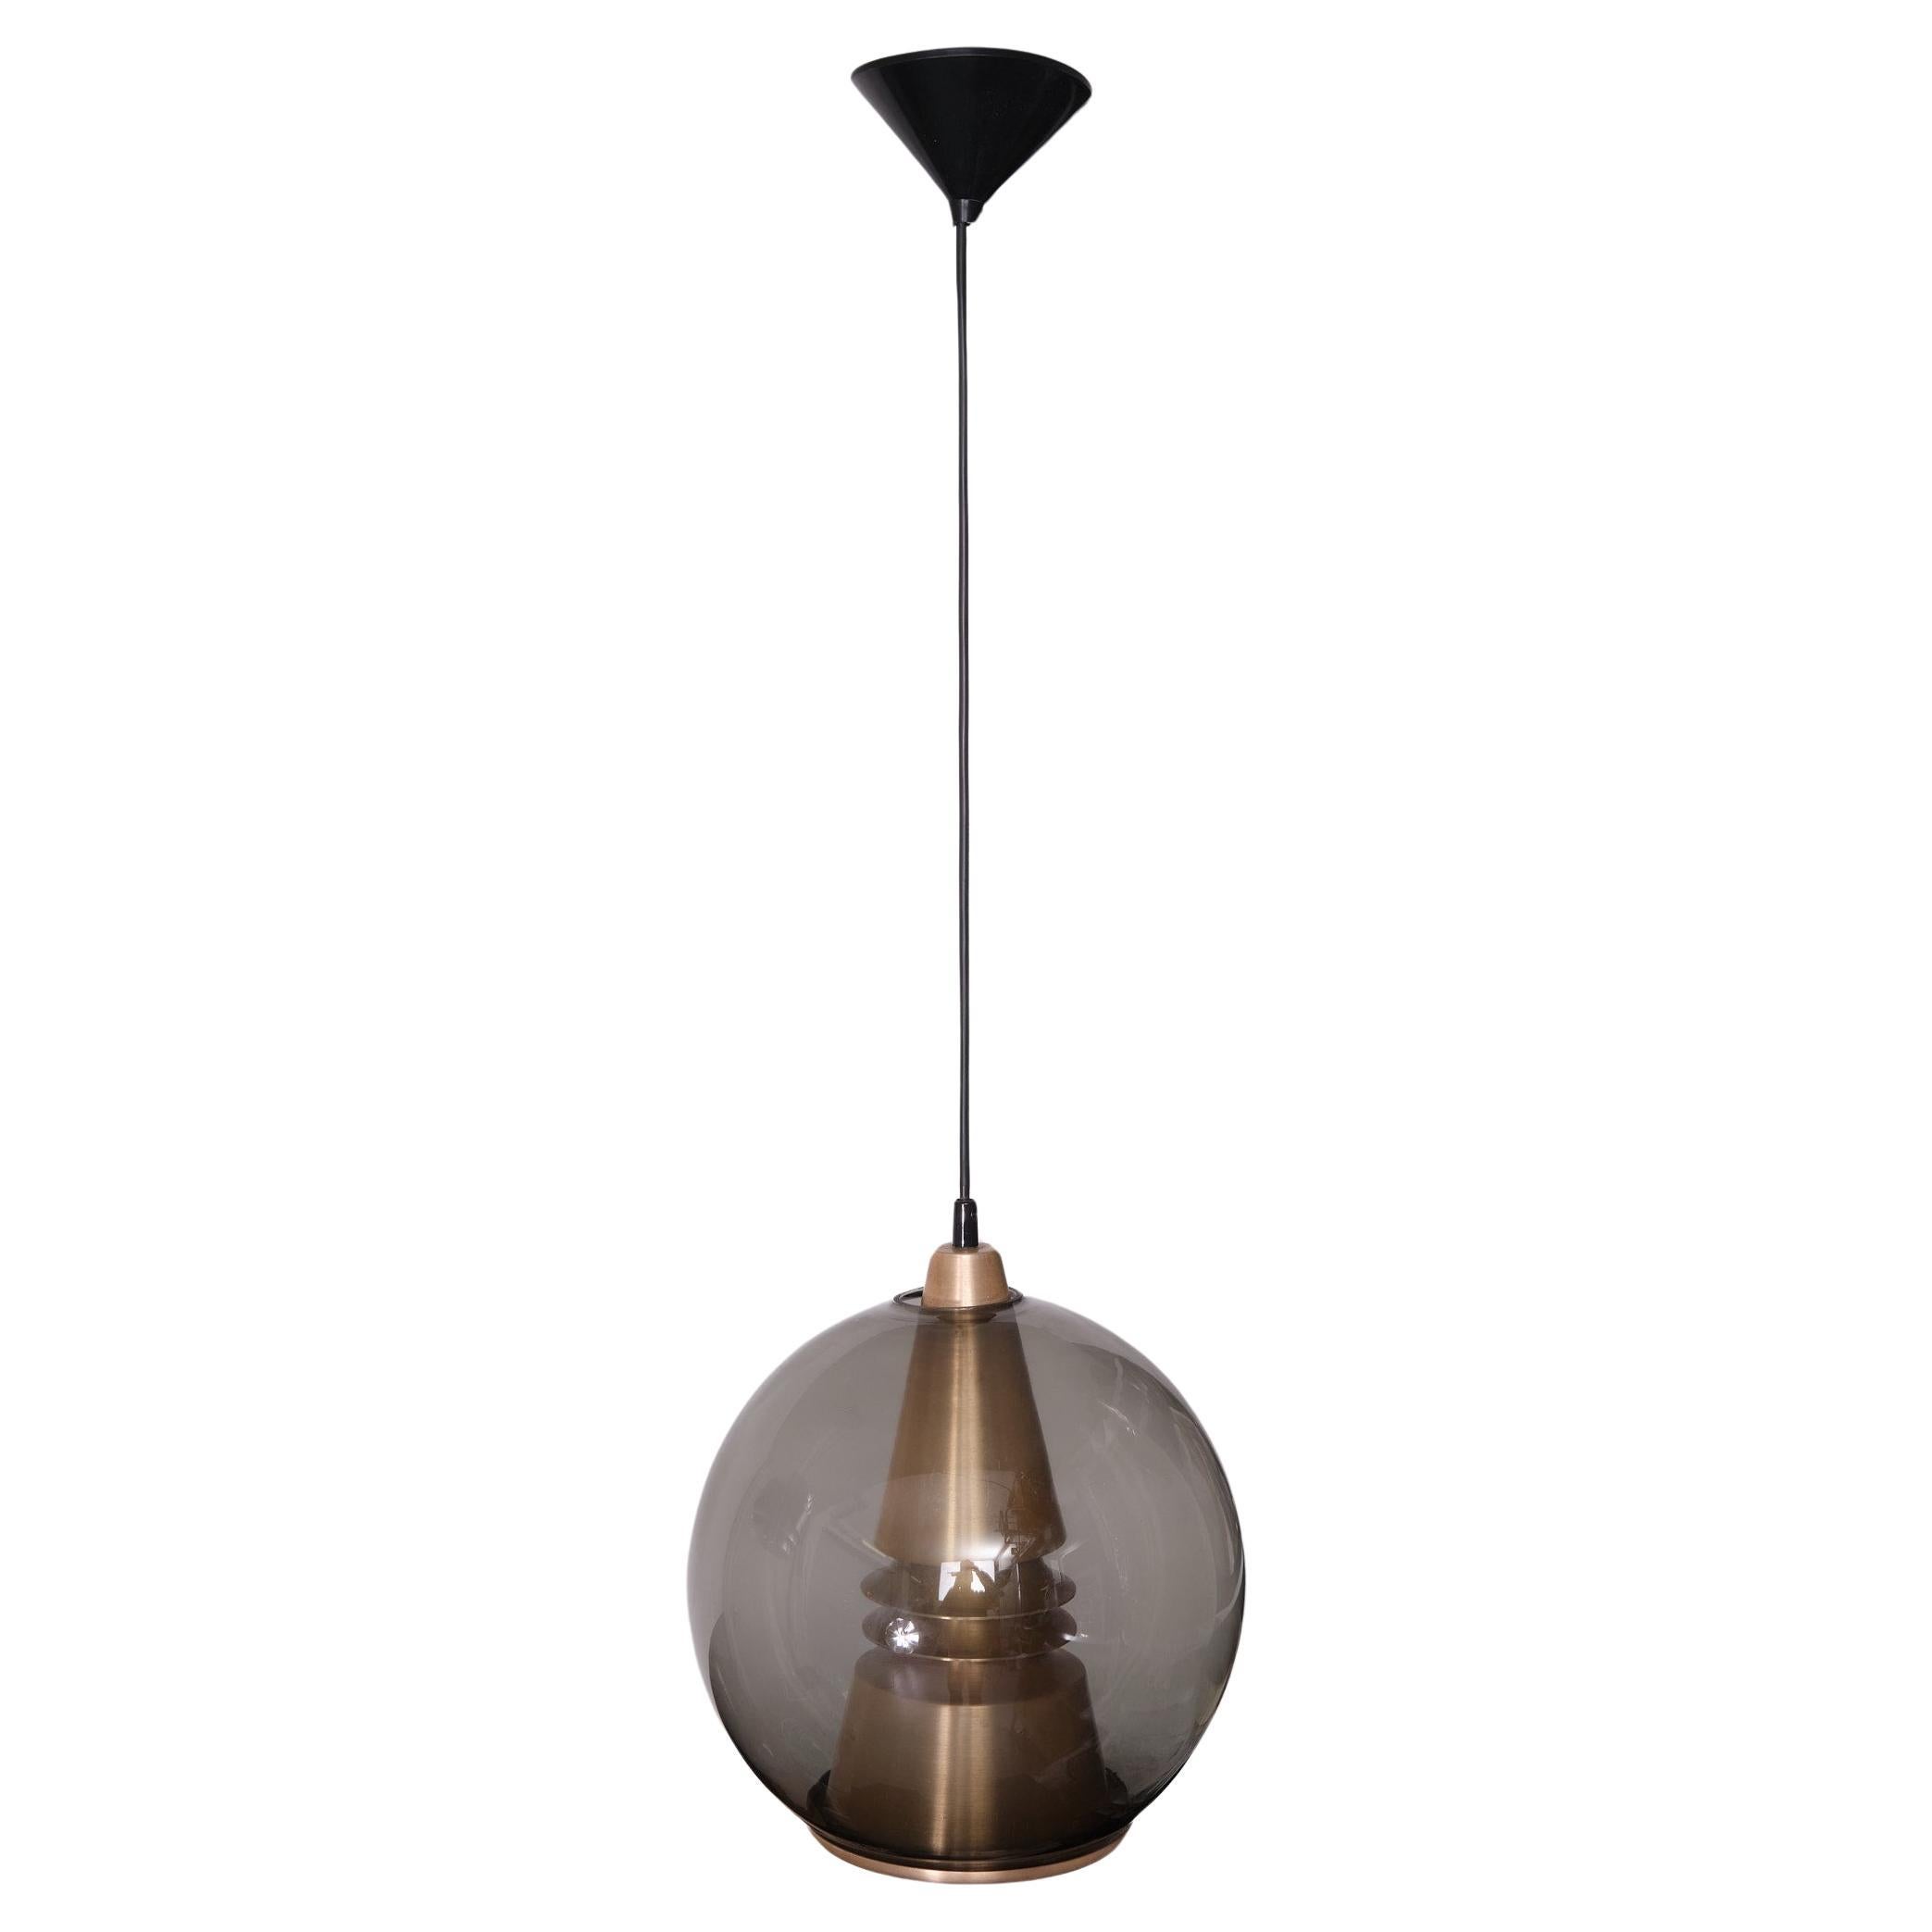 Beautiful pendant lamp. Smoked Glass dome ,comes with a Bronze 
color Aluminum shade inside .Very good quality piece . signed by
T. Røste & Co. design by  Birger Hammerstad .Norway .
very good condition .

